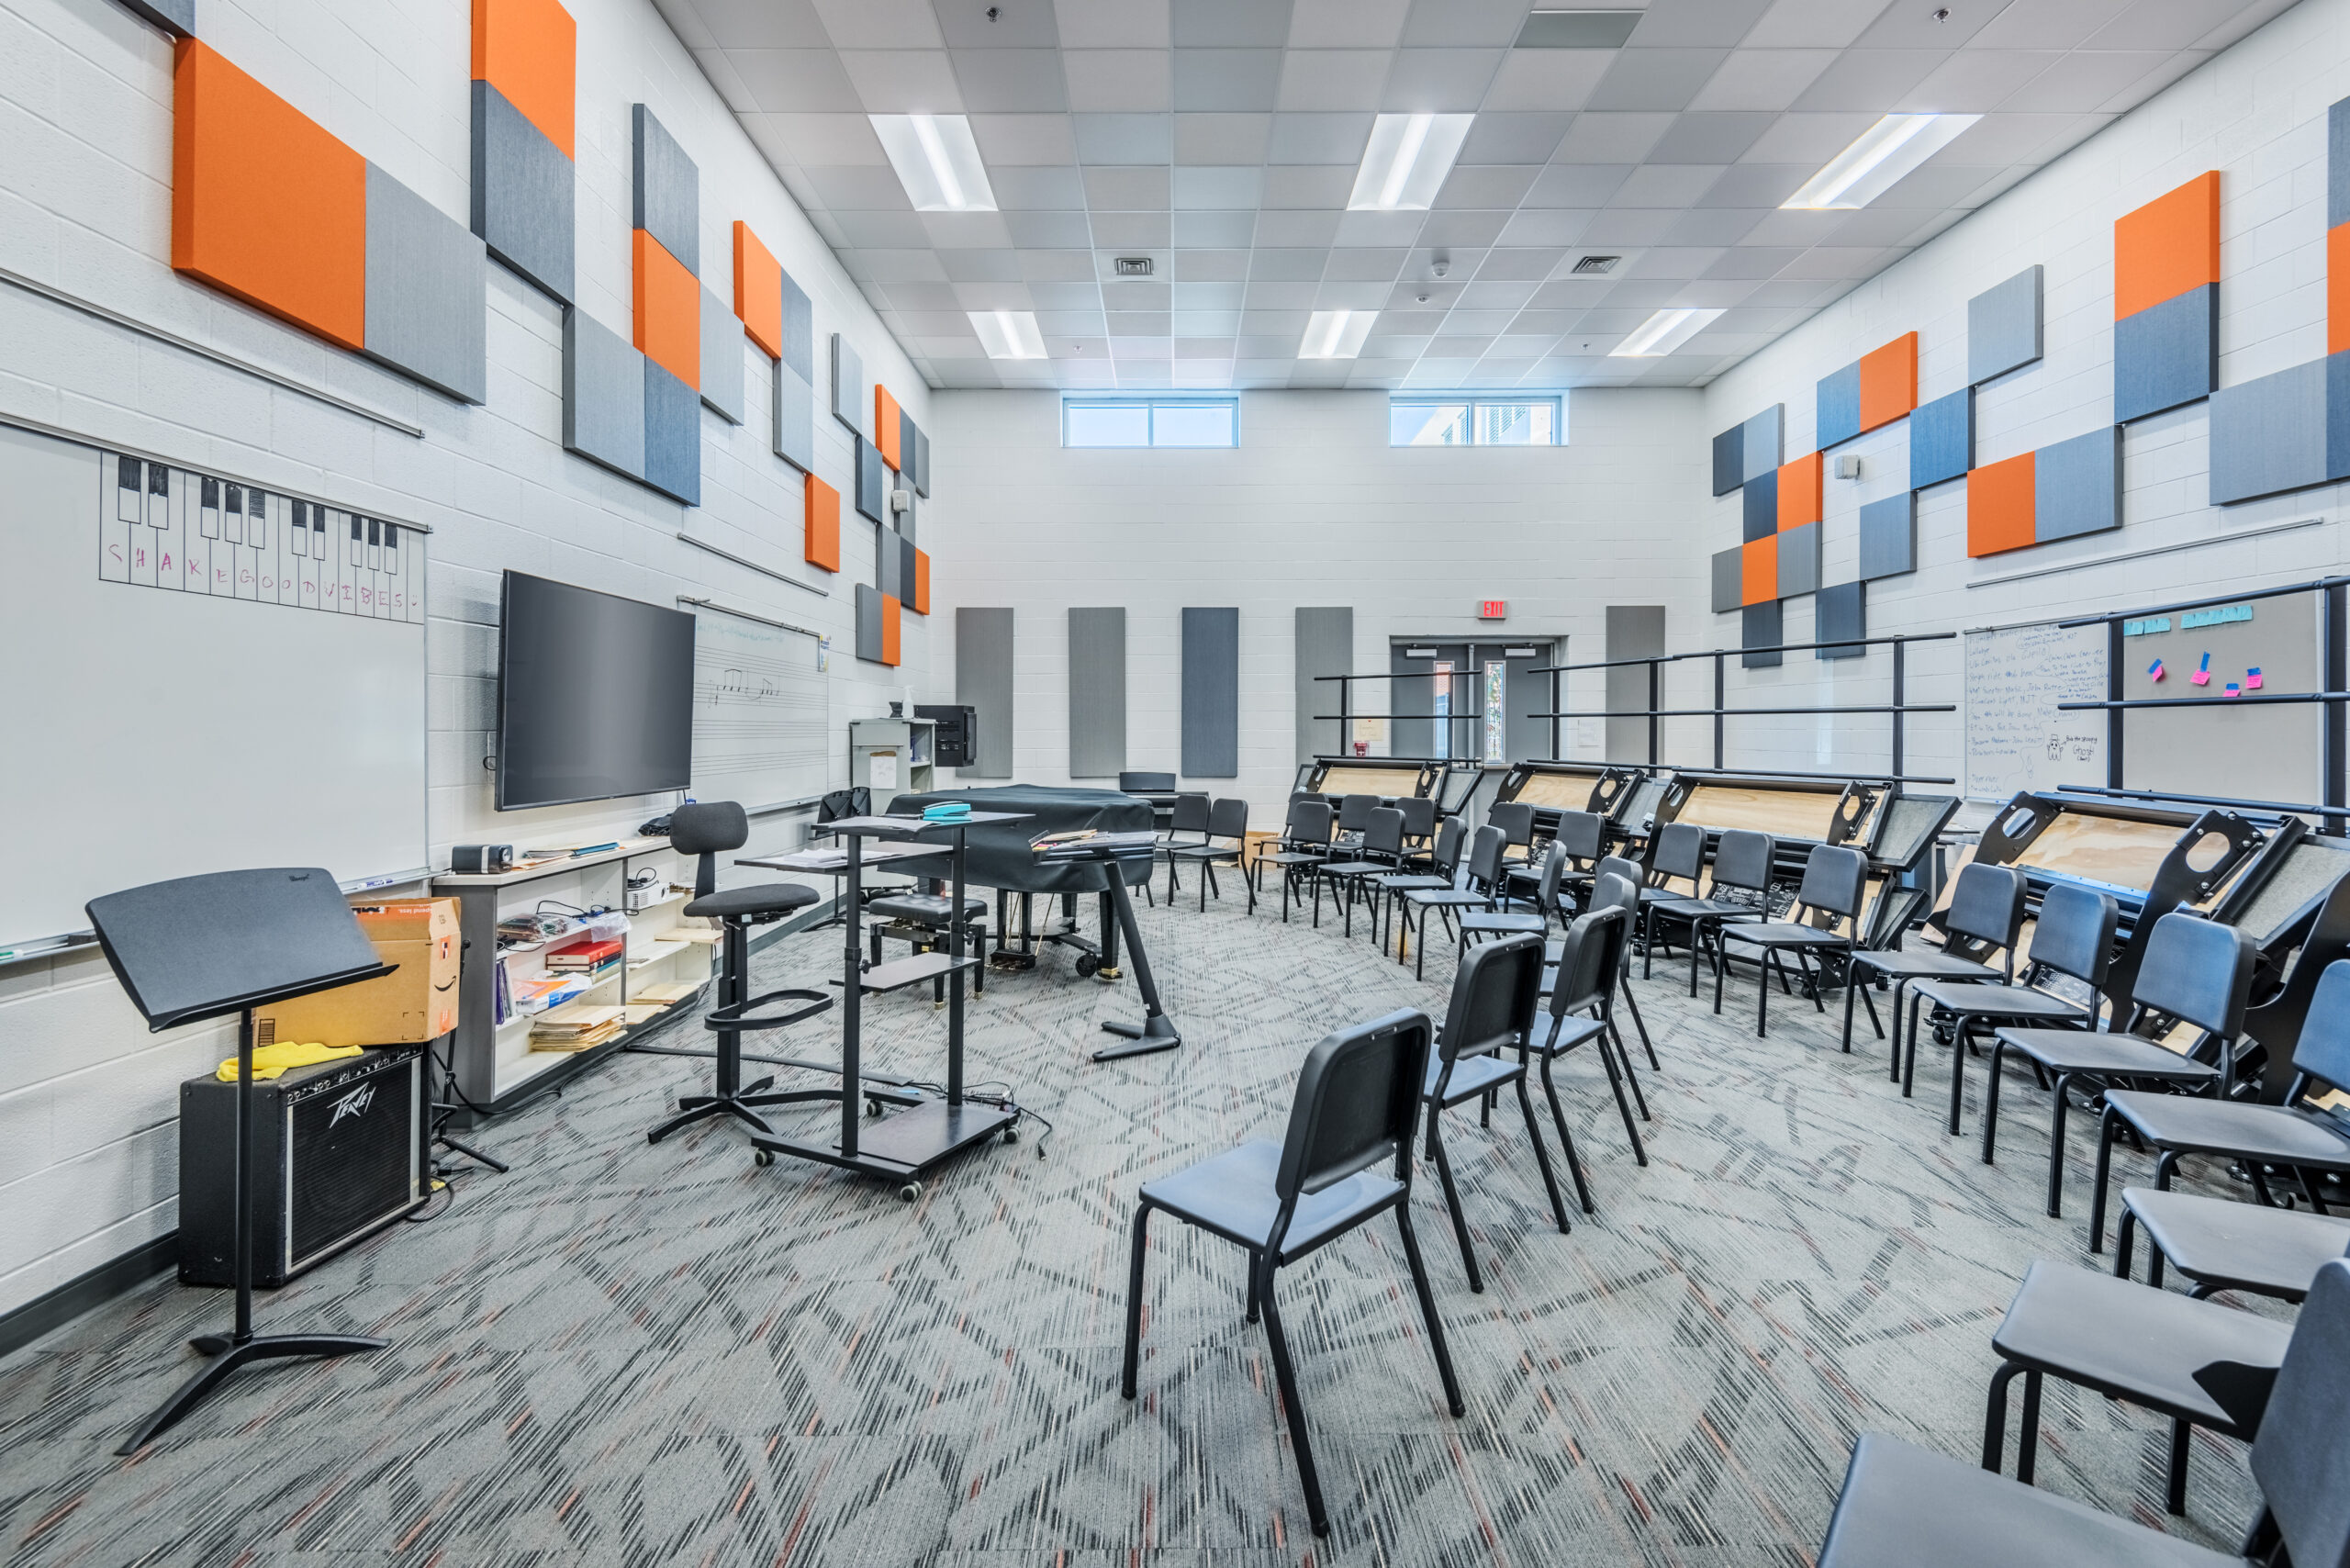 Fuquay-Varina High School Band Room with Sound Dampening Equipment on the Walls